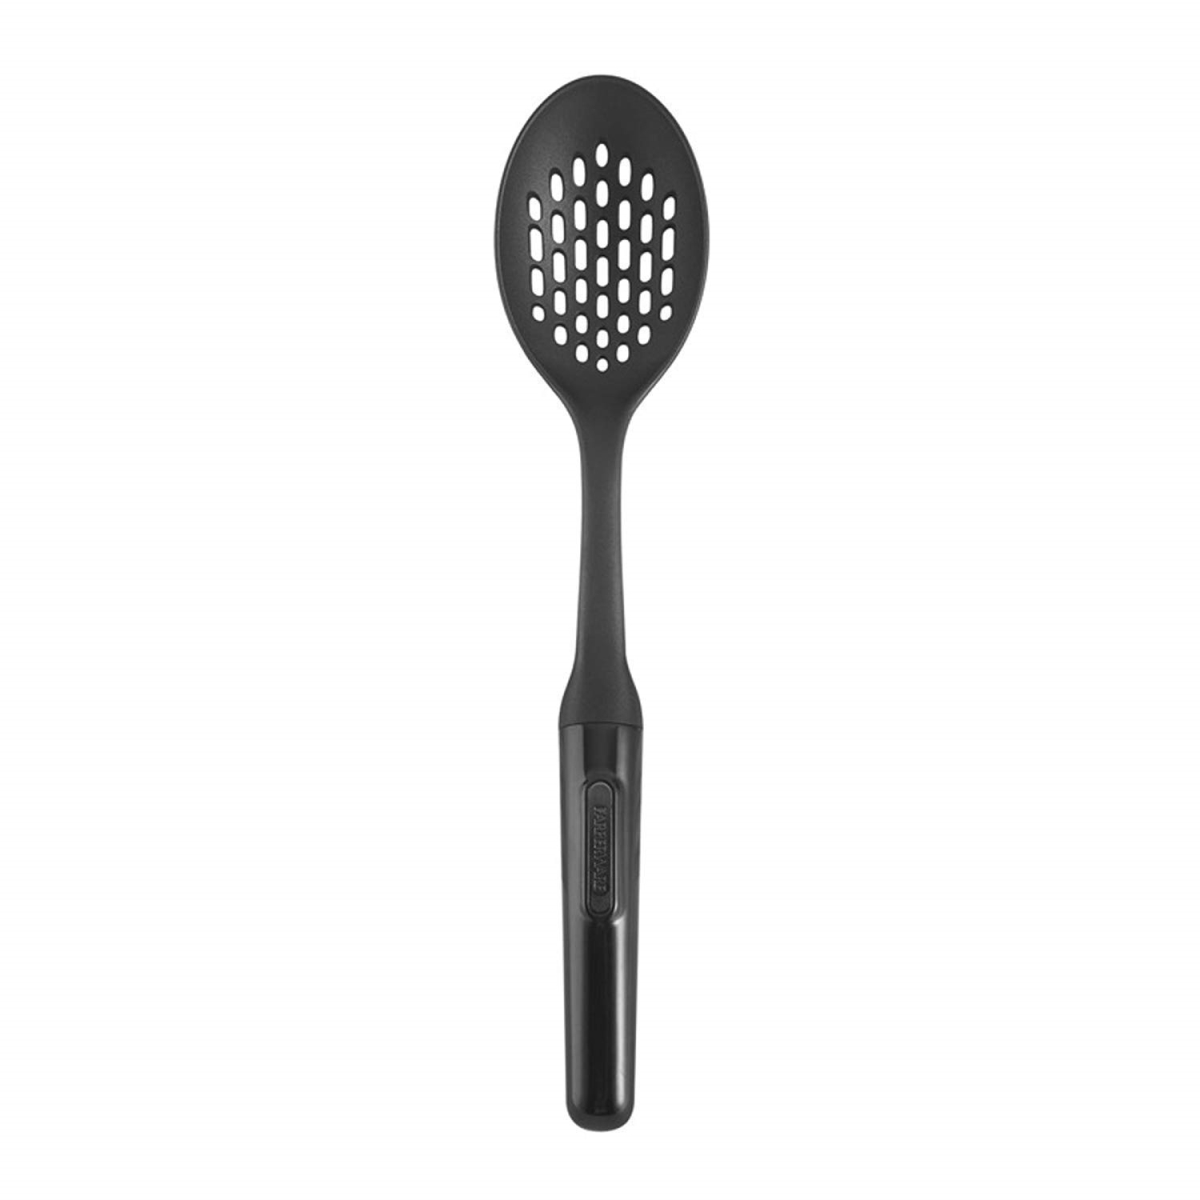 5211440 Blk Professional Slotted Cooking Spoon, Black - Pack Of 3